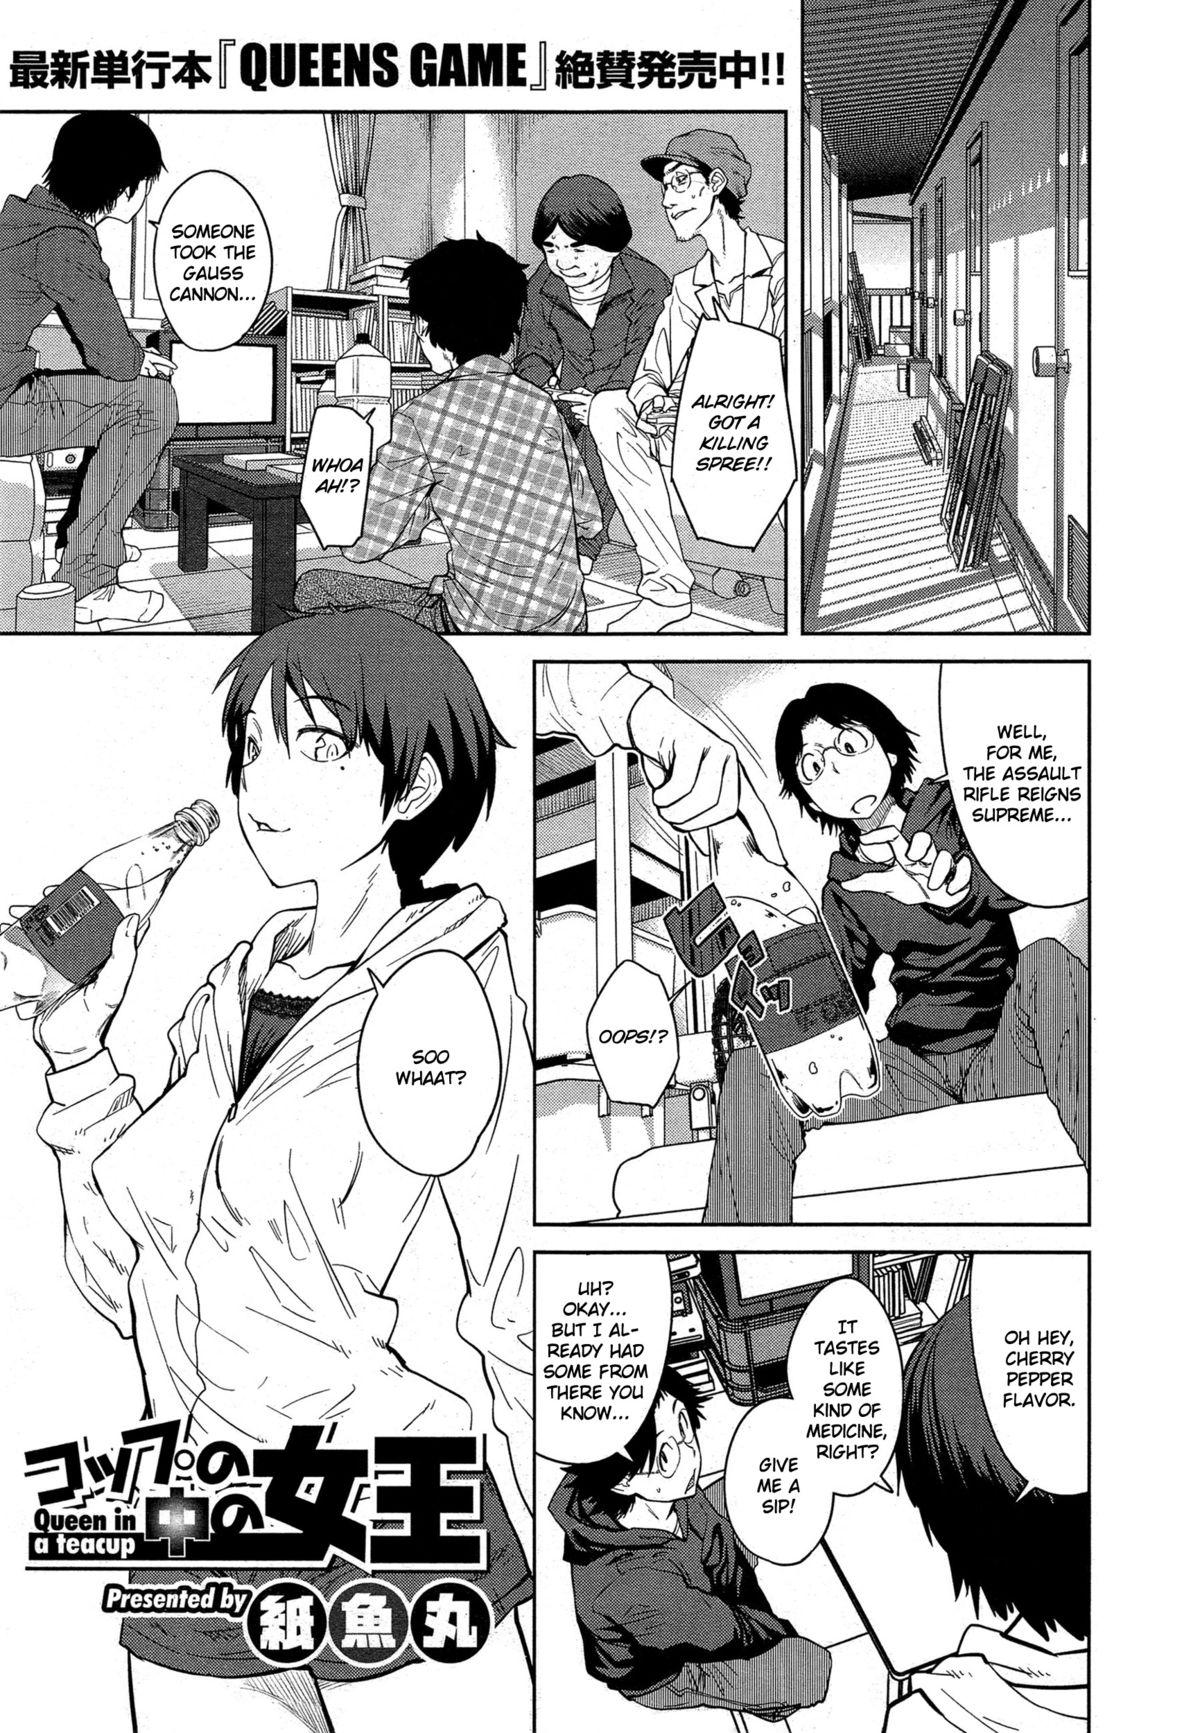 Hardcore "Joou" Series | "Queen" Series Ch. 1-2 Smooth - Page 1